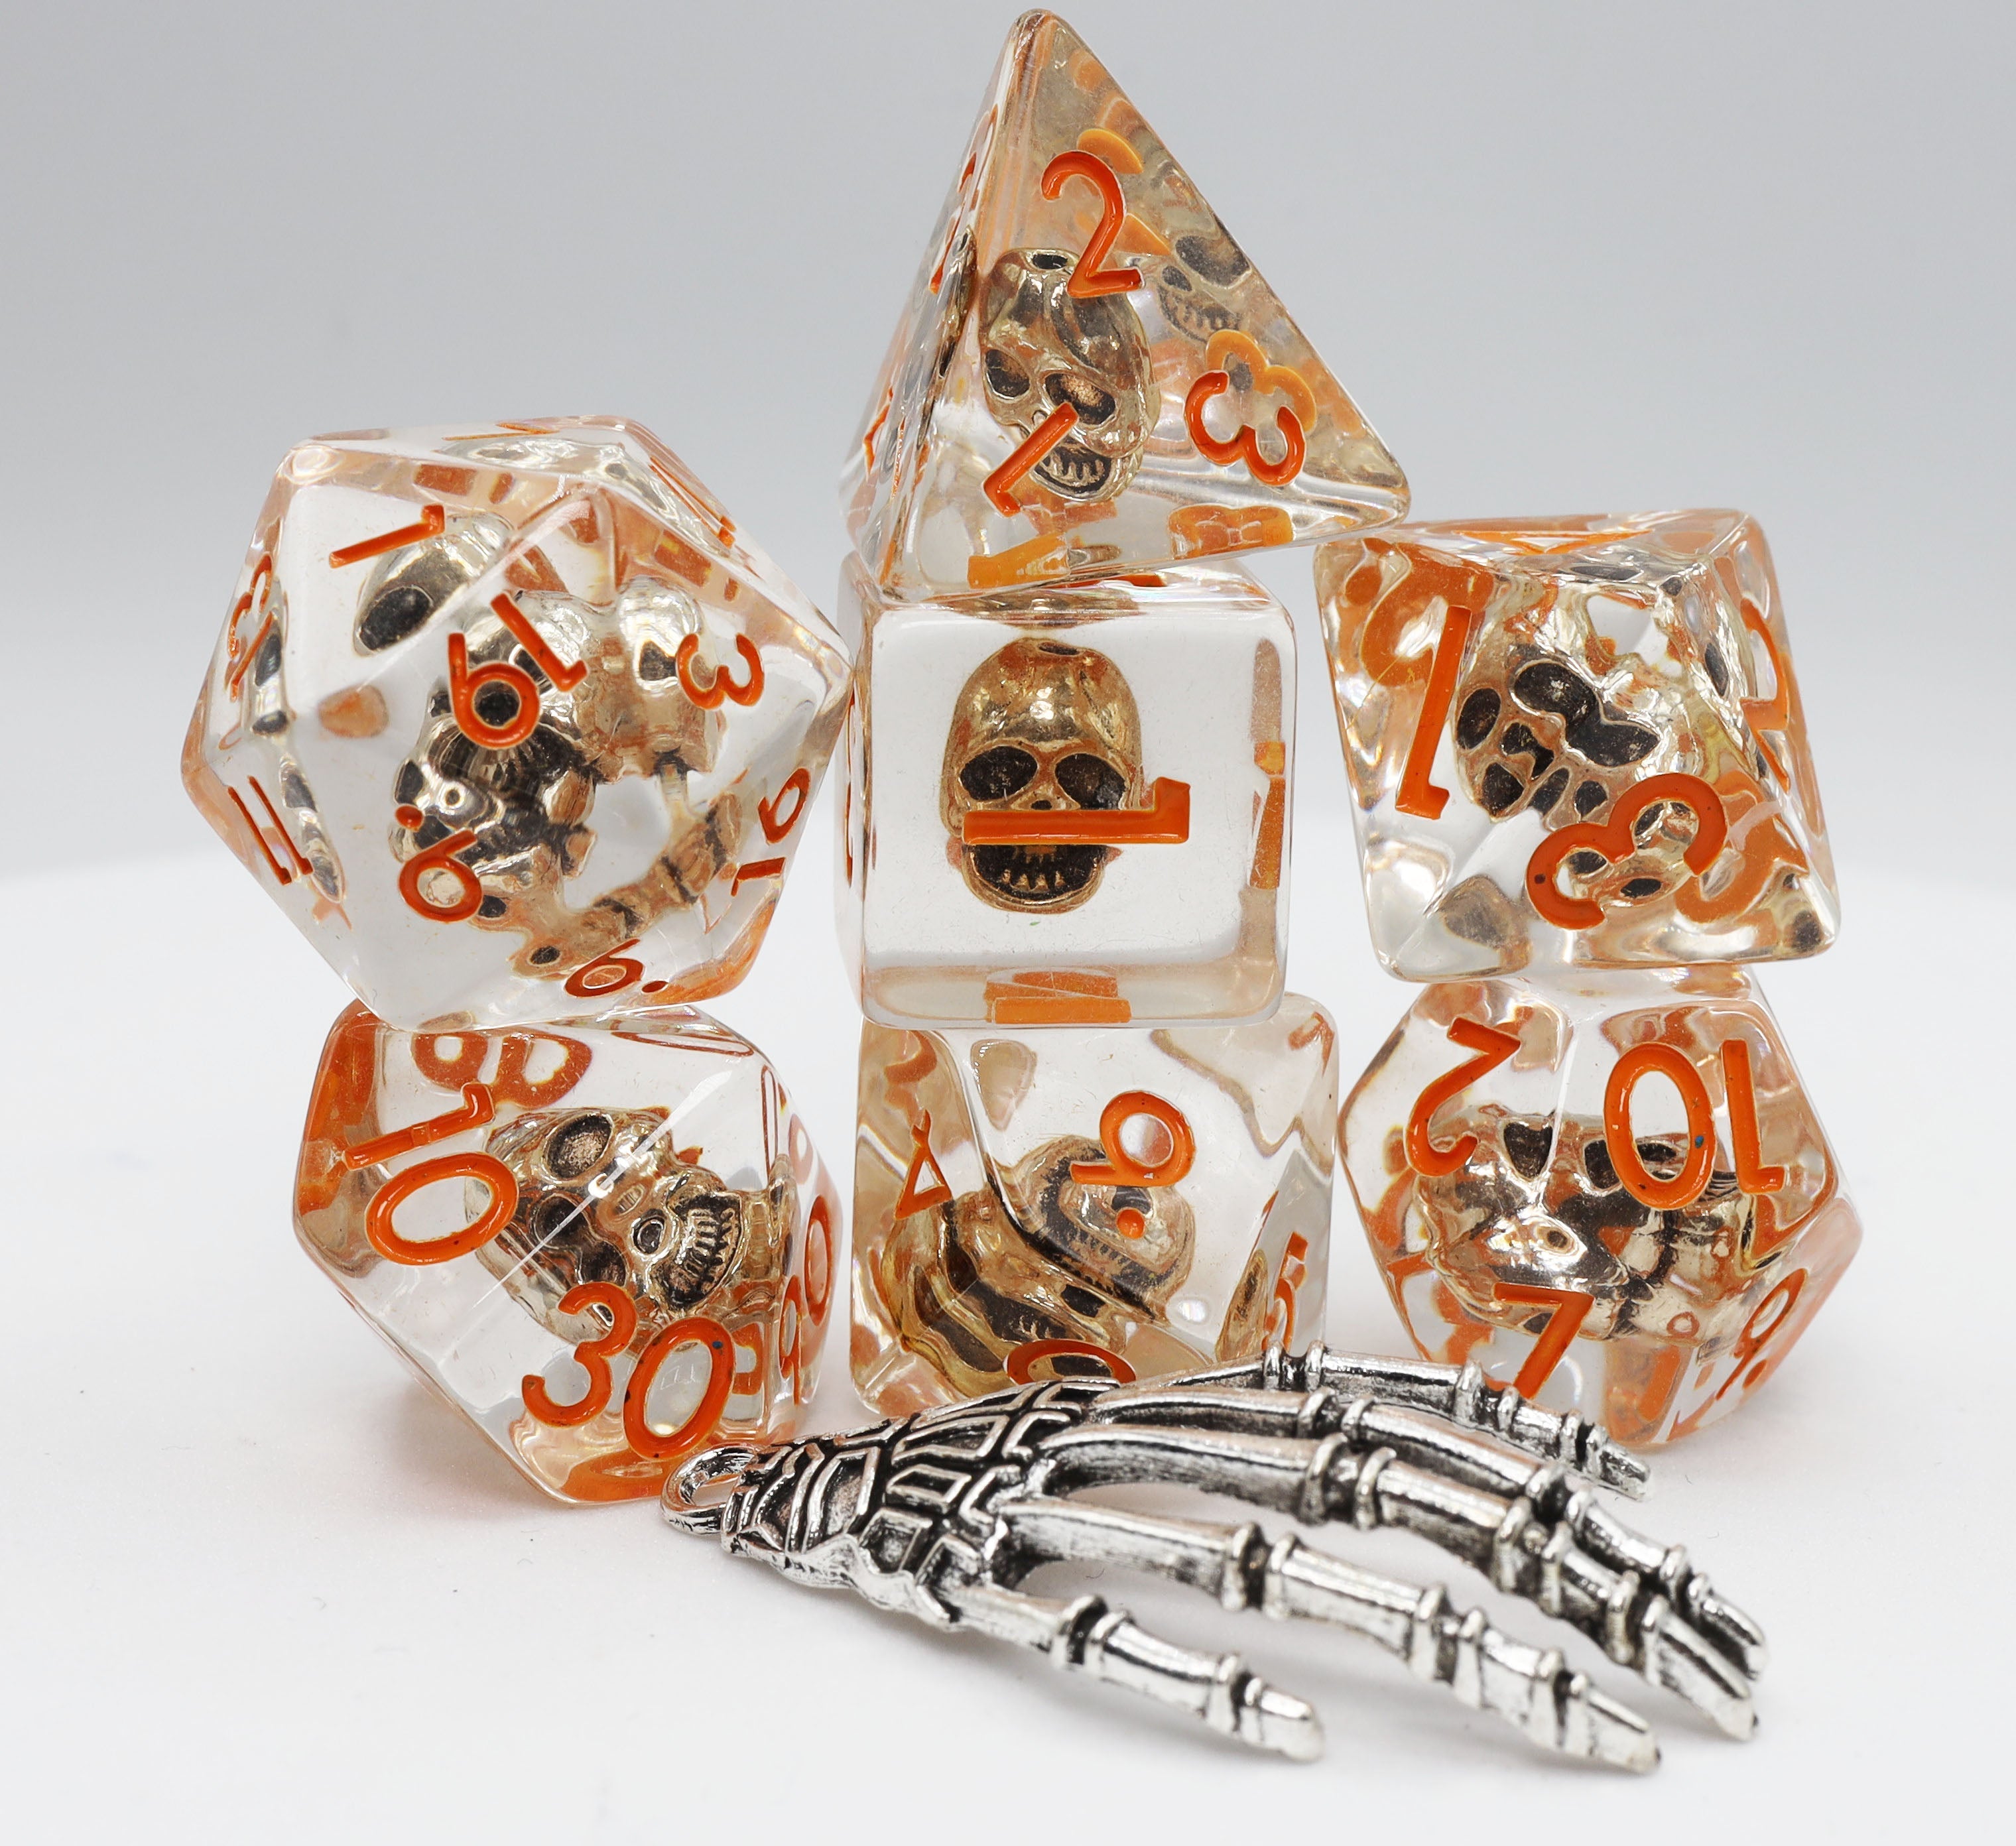 Laughing Skull RPG Dice Set - Bards & Cards